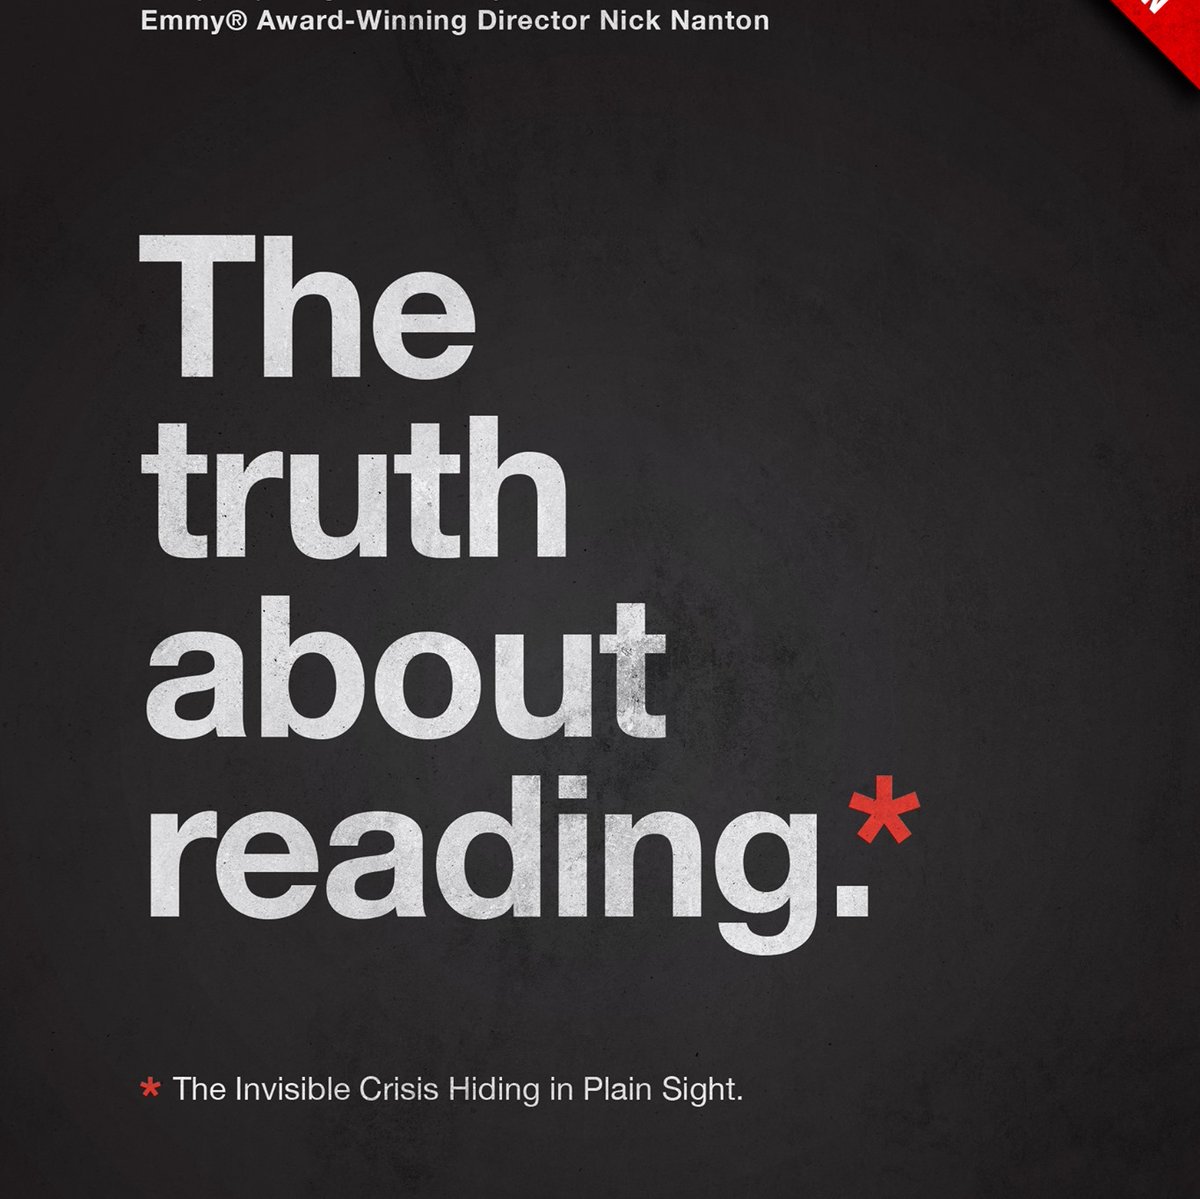 Have you RSVPed for the private screening of #TheTruthAboutReading at buff.ly/3GzTHgM yet? On site at 8:45 am or off site at 6:30 pm #ScienceofReading #EdCon23 #WIreads #EquityThroughLiteracy @WASBWI @WASDA @JCFliteracy @JohnCorcoranFDN @truthabout2023 @nicknanton1